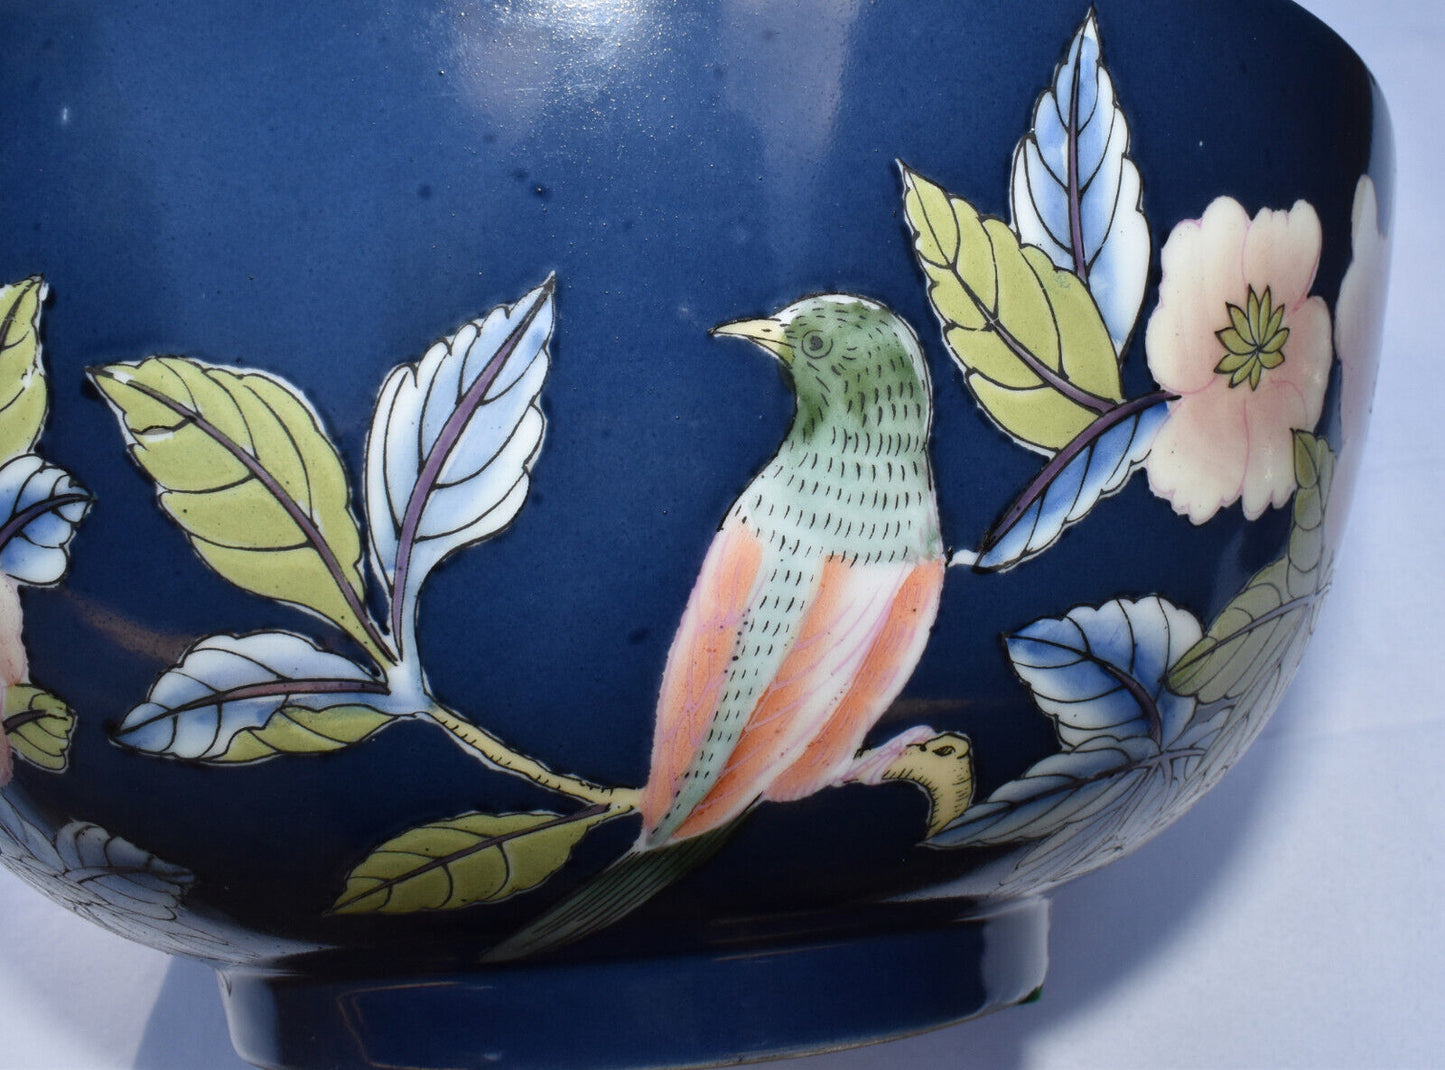 Mid/Late 20th Century Chinese 10" Blue Porcelain Bowl Hand Painted Flowers Birds